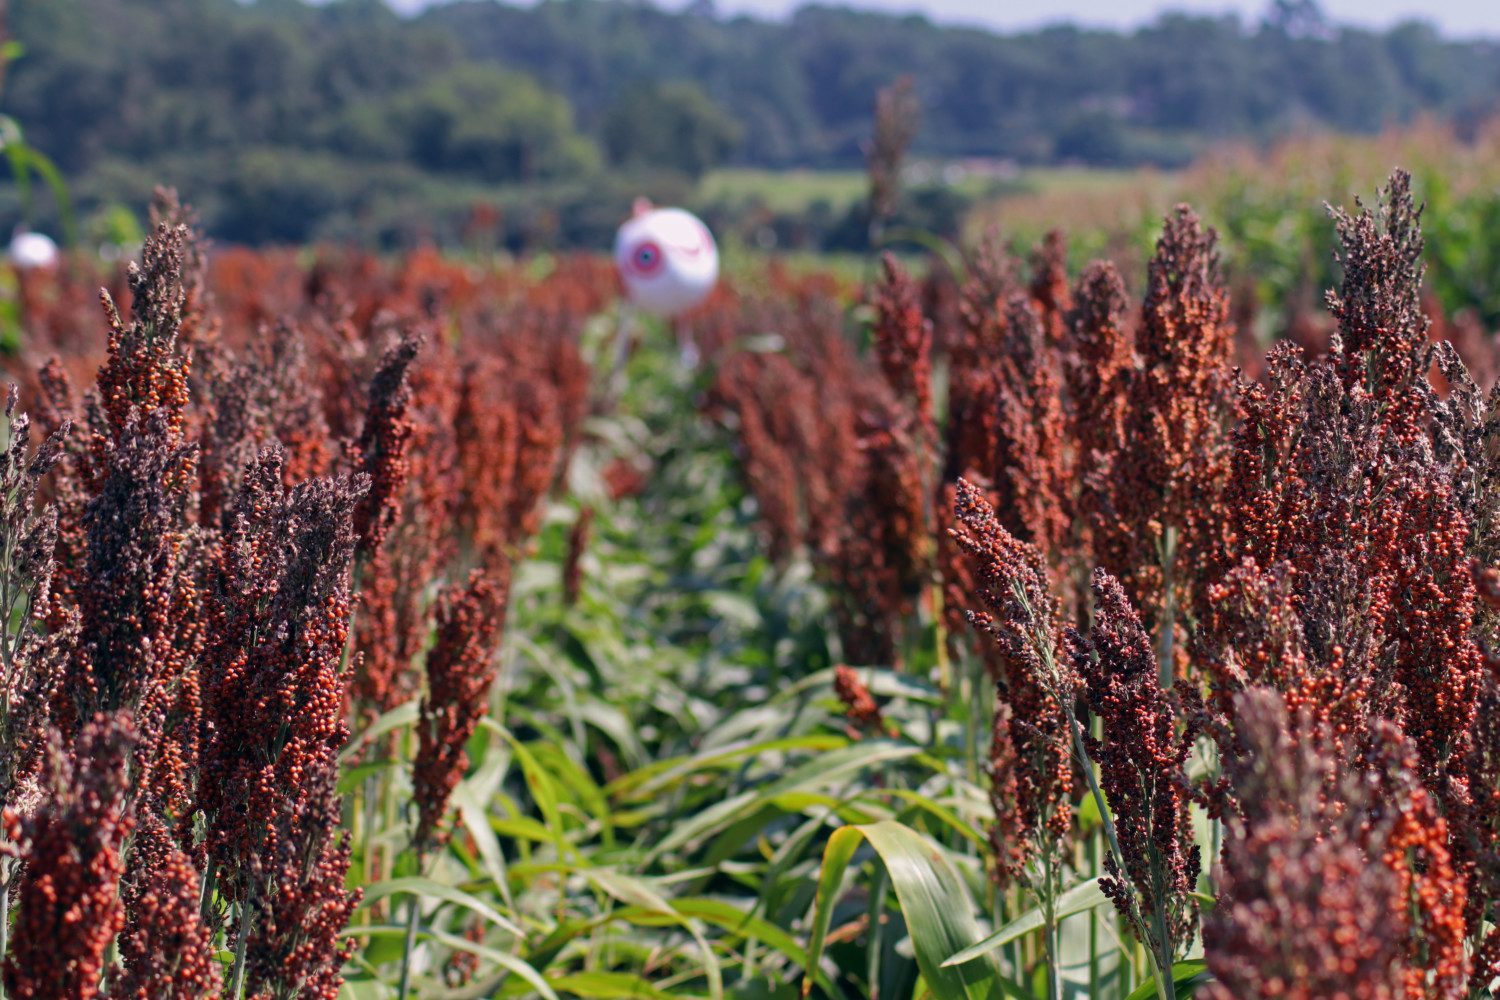 Sorghum is one of the world's leading "green" crops.